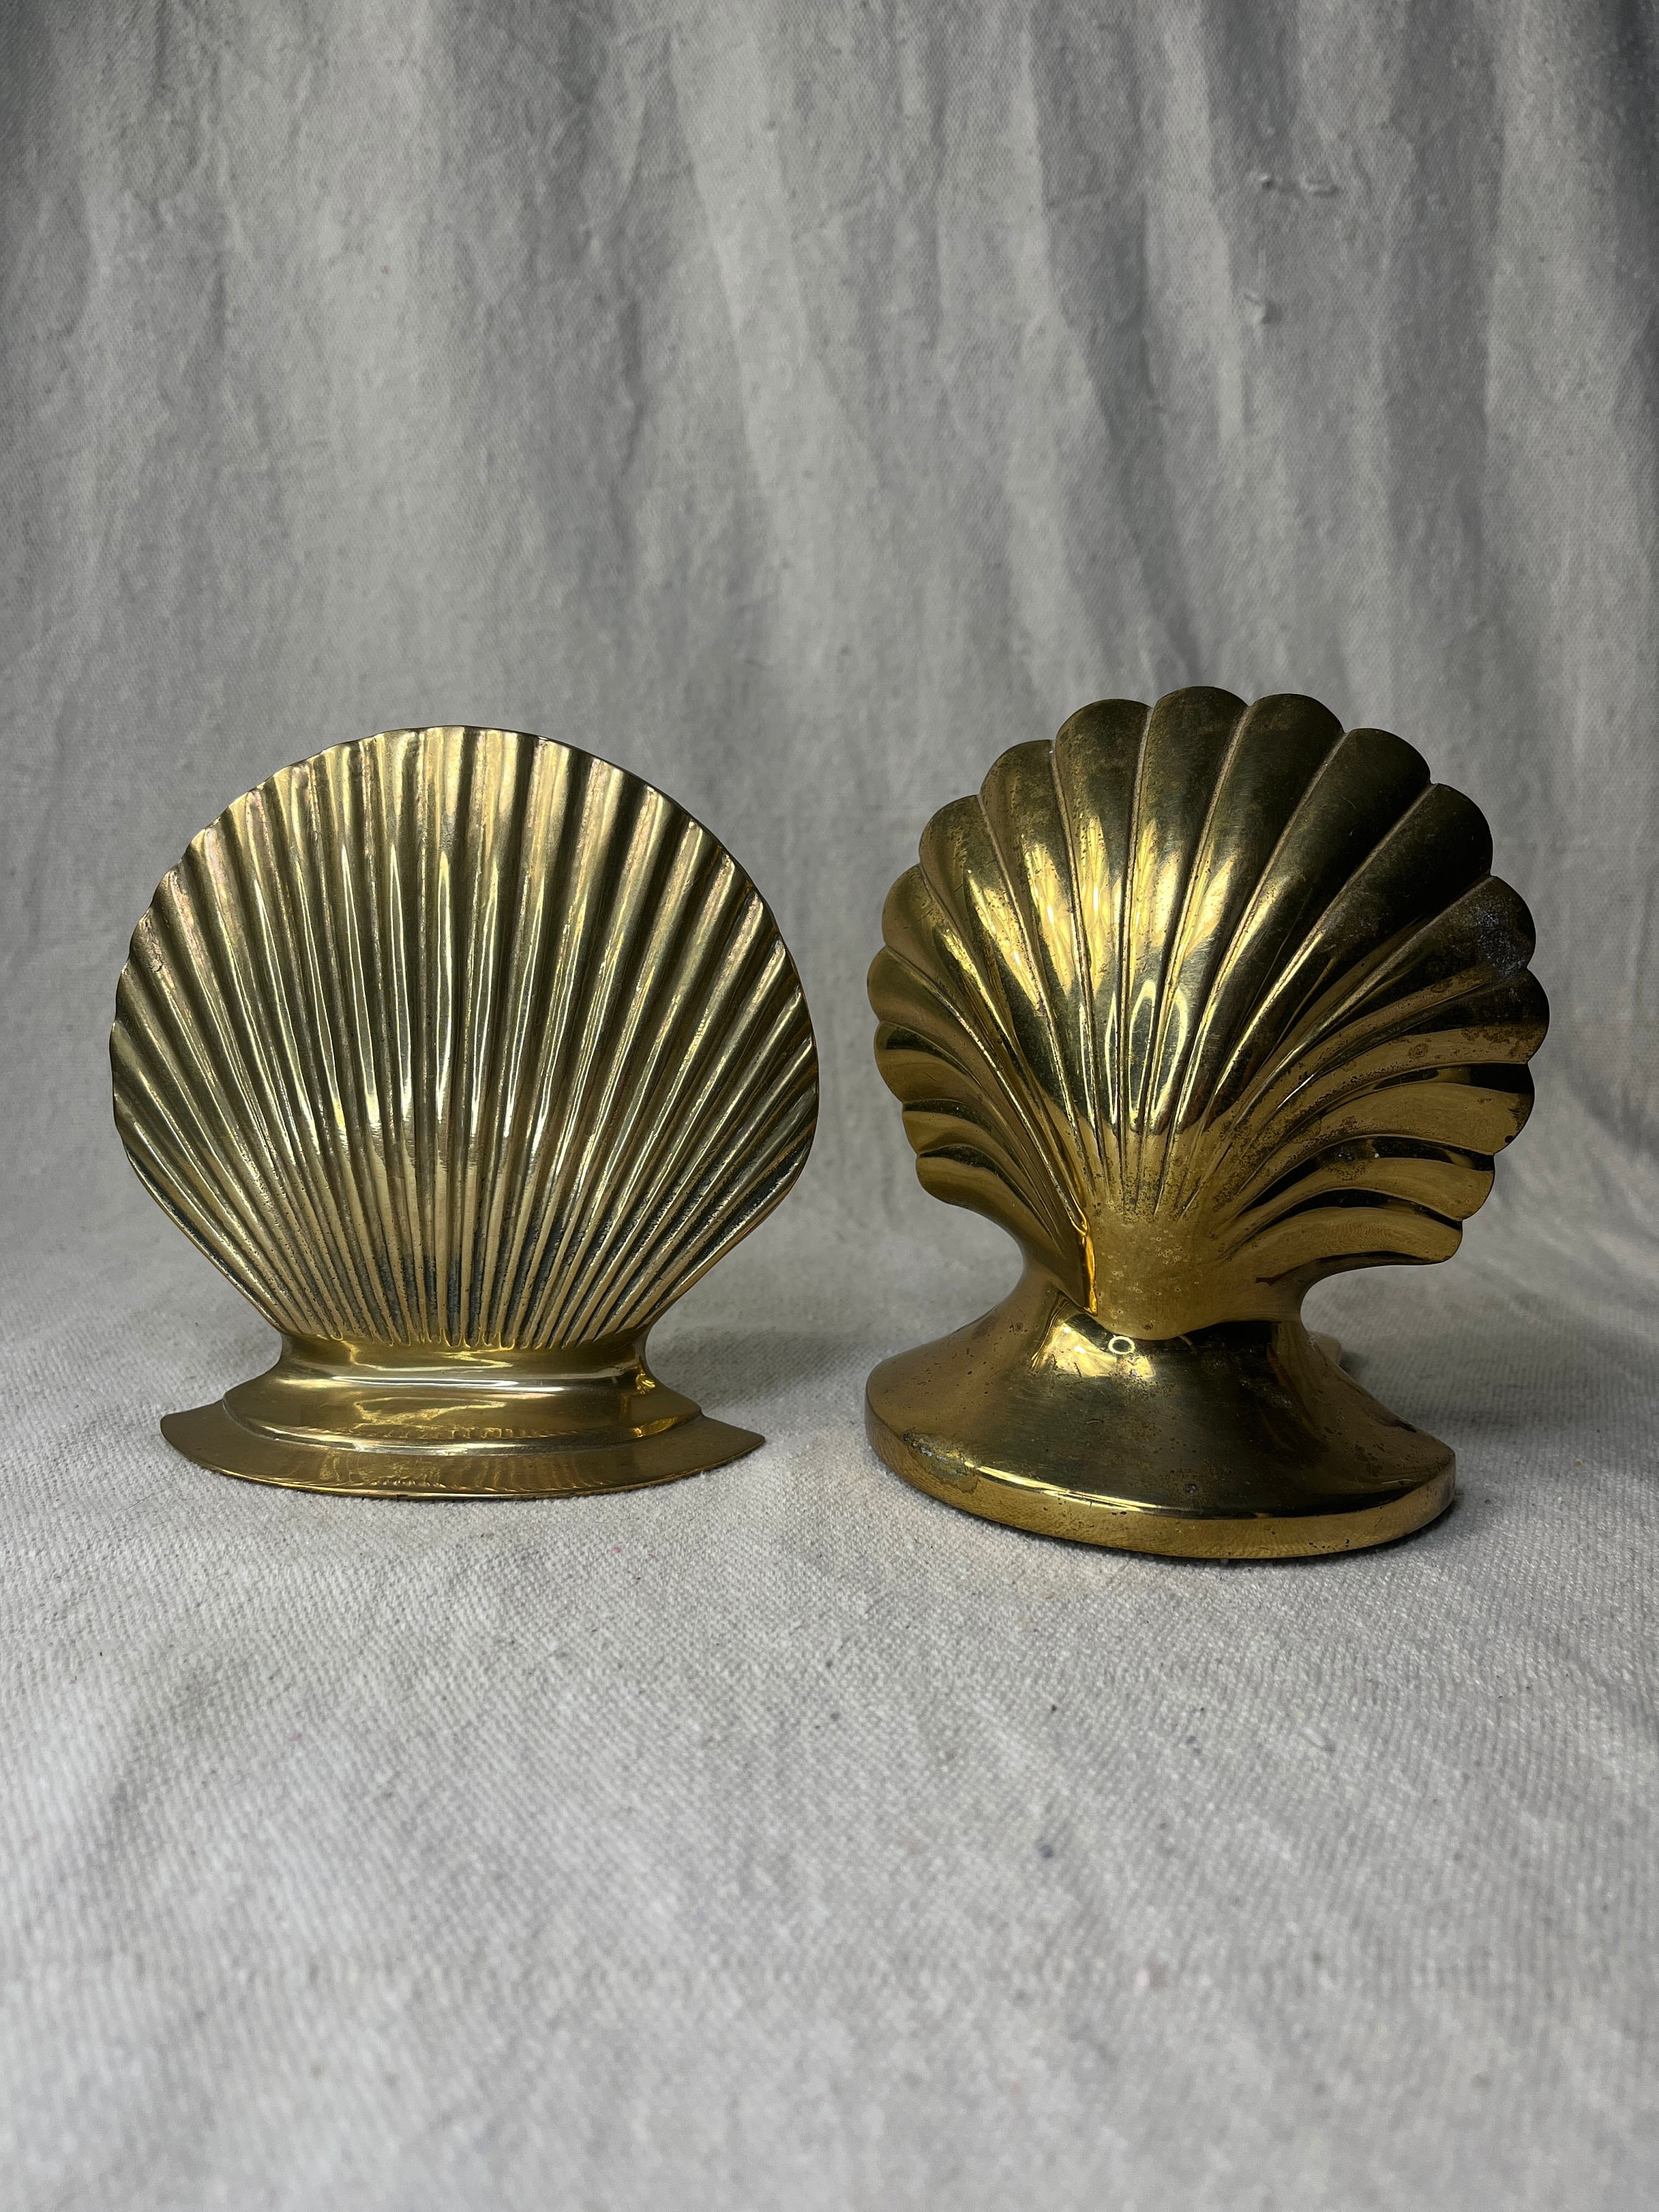 Mismatched Pair of Vintage Brass Shell Bookends, Seashells